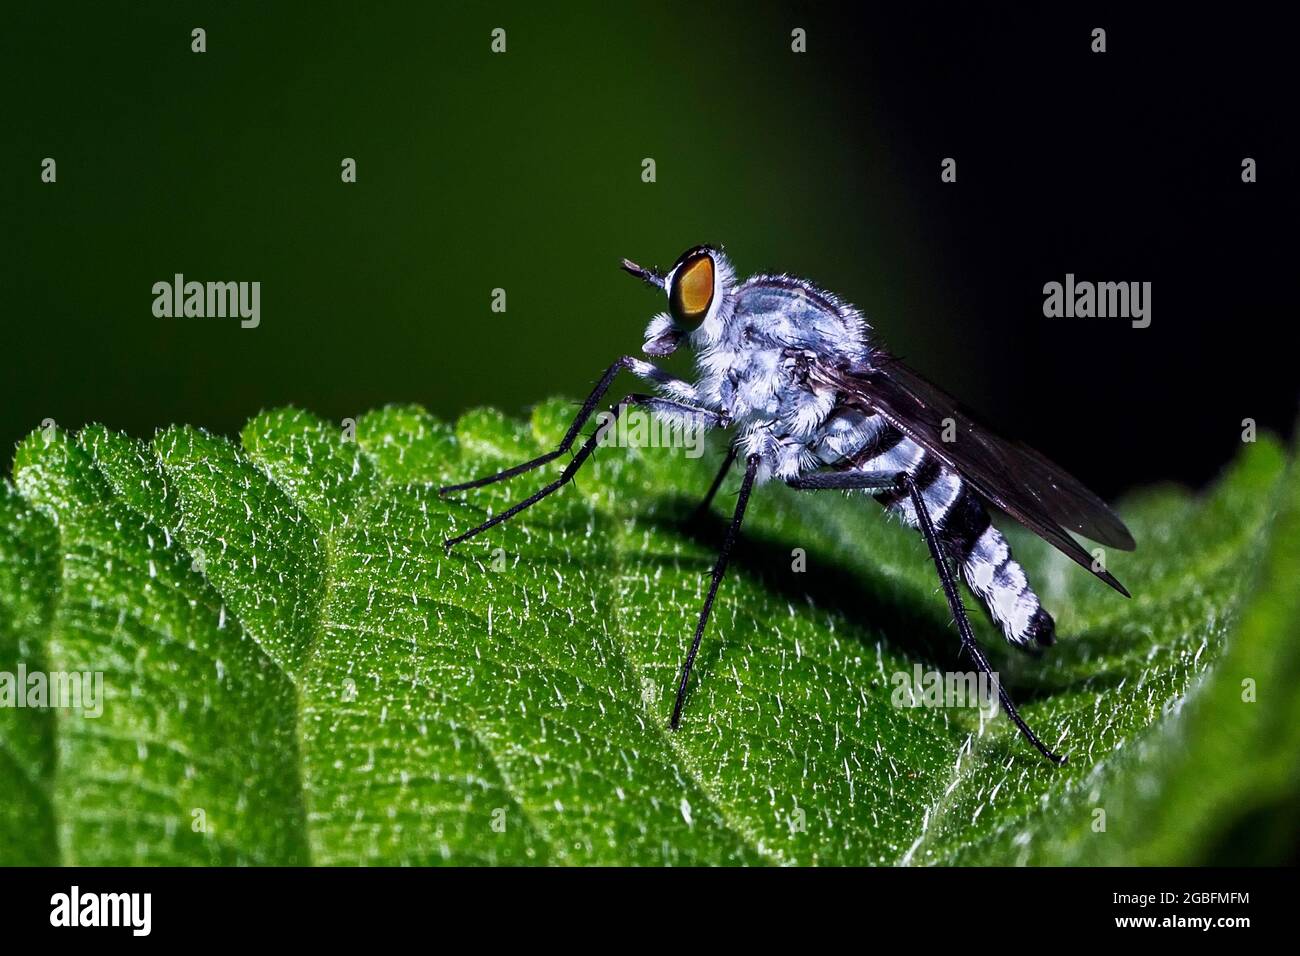 a close up of a long legged fly insect Stock Photo